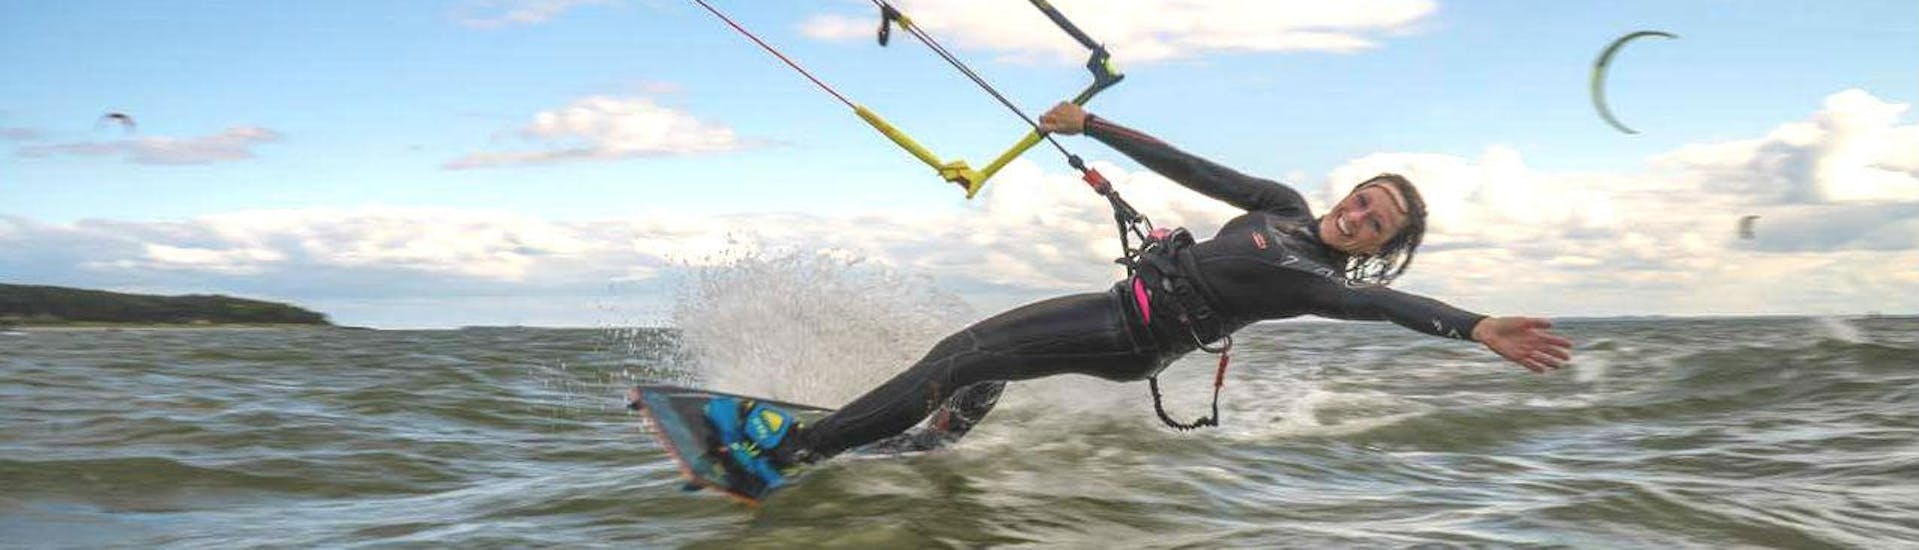 A kitesurfer on the sea during Kitesurfing Lessons "Refresh" in Thiessow with ProBoarding Rügen.